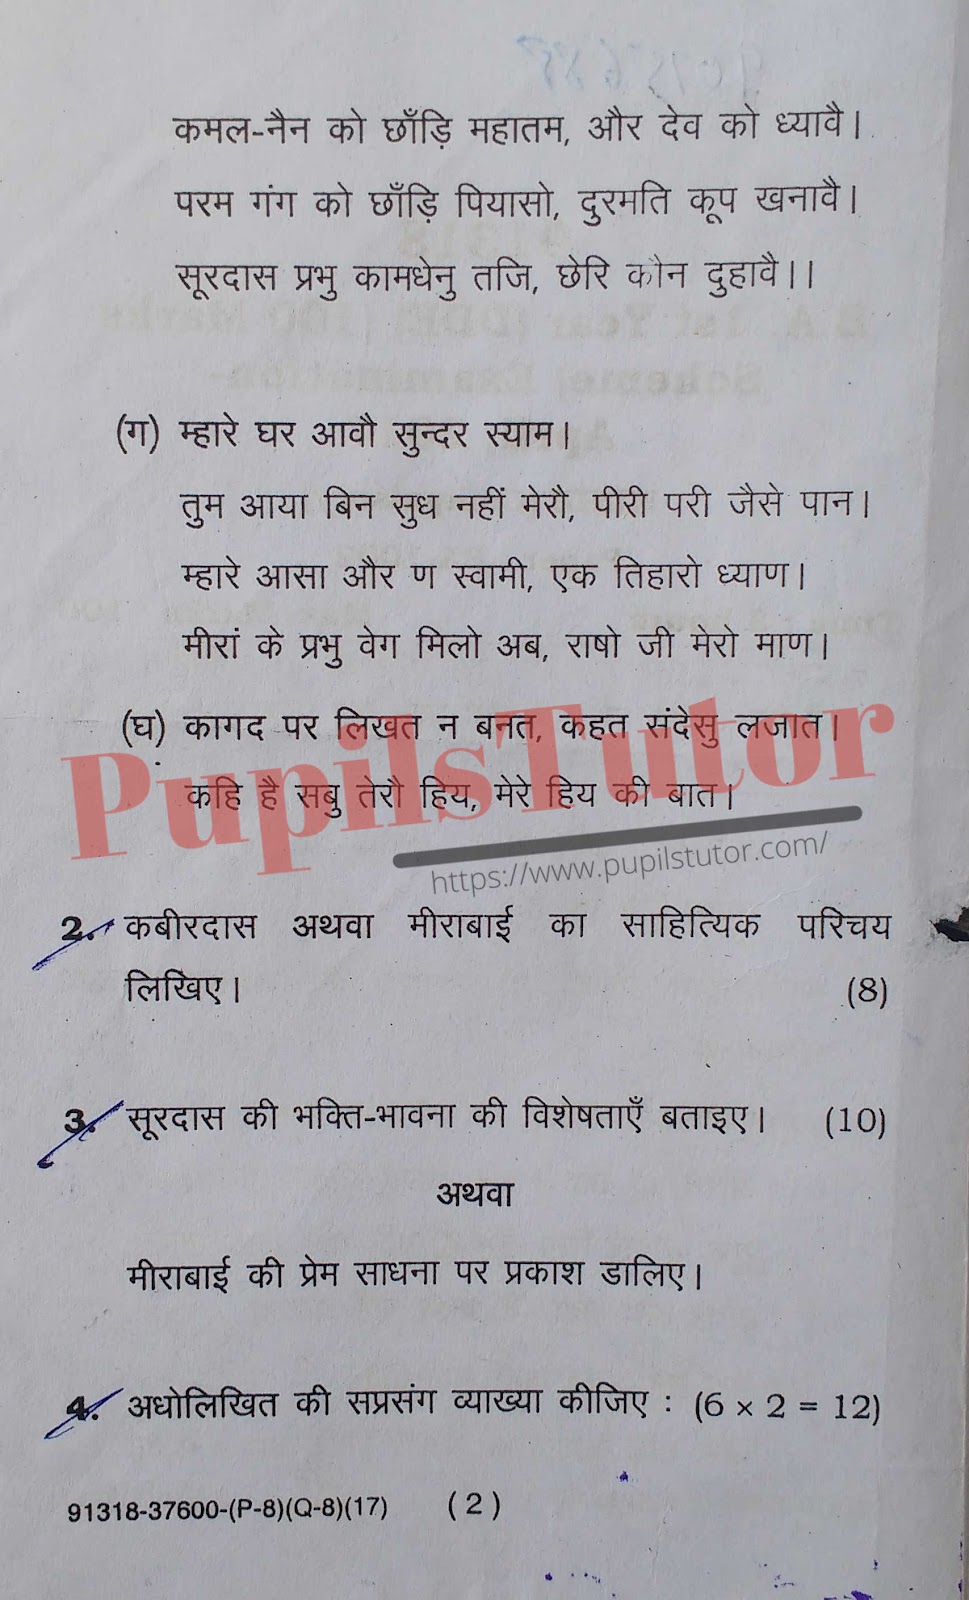 M.D. University B.A. Hindi (Compulsory) First Year Important Question Answer And Solution - www.pupilstutor.com (Paper Page Number 2)